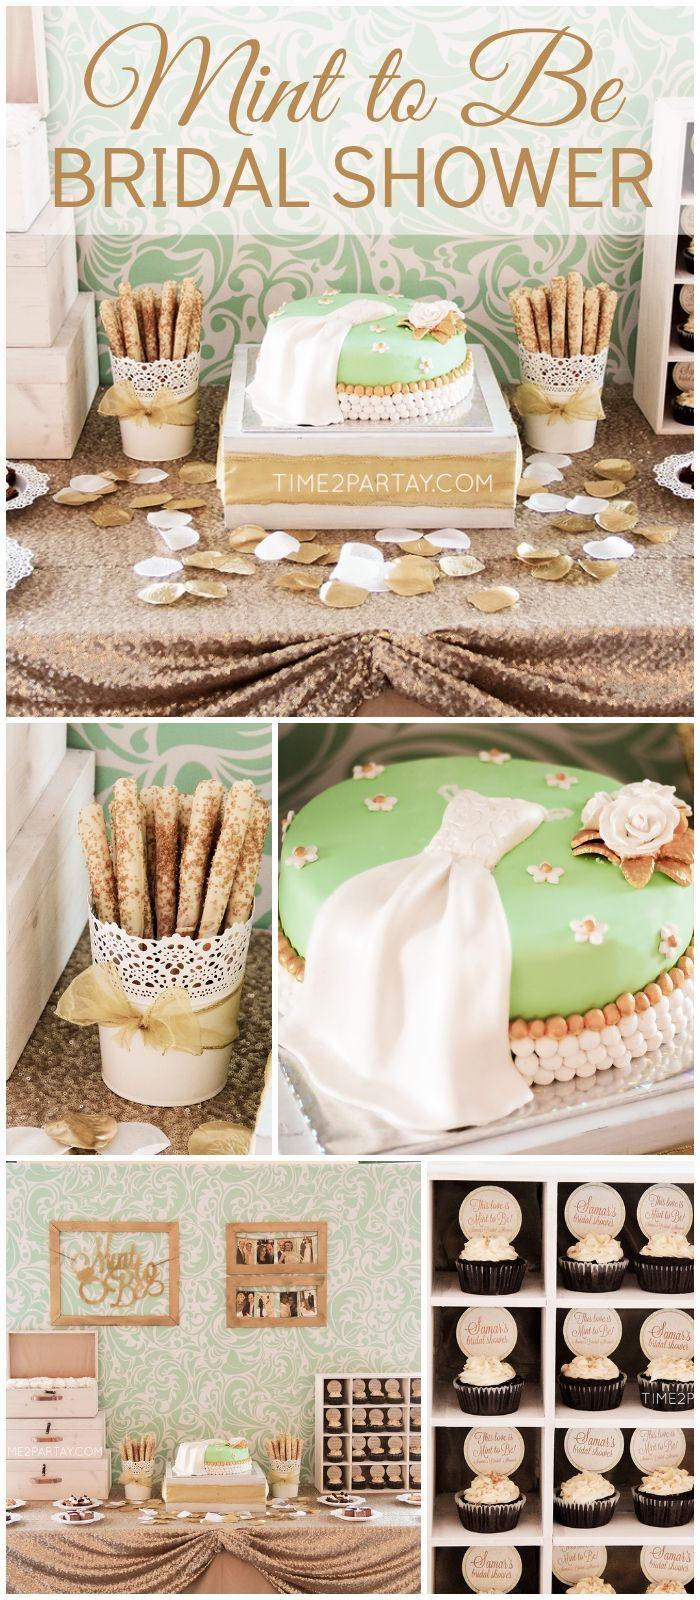 Mariage - Mint Theme / Bridal/Wedding Shower "A Mint To Be Bridal Shower"